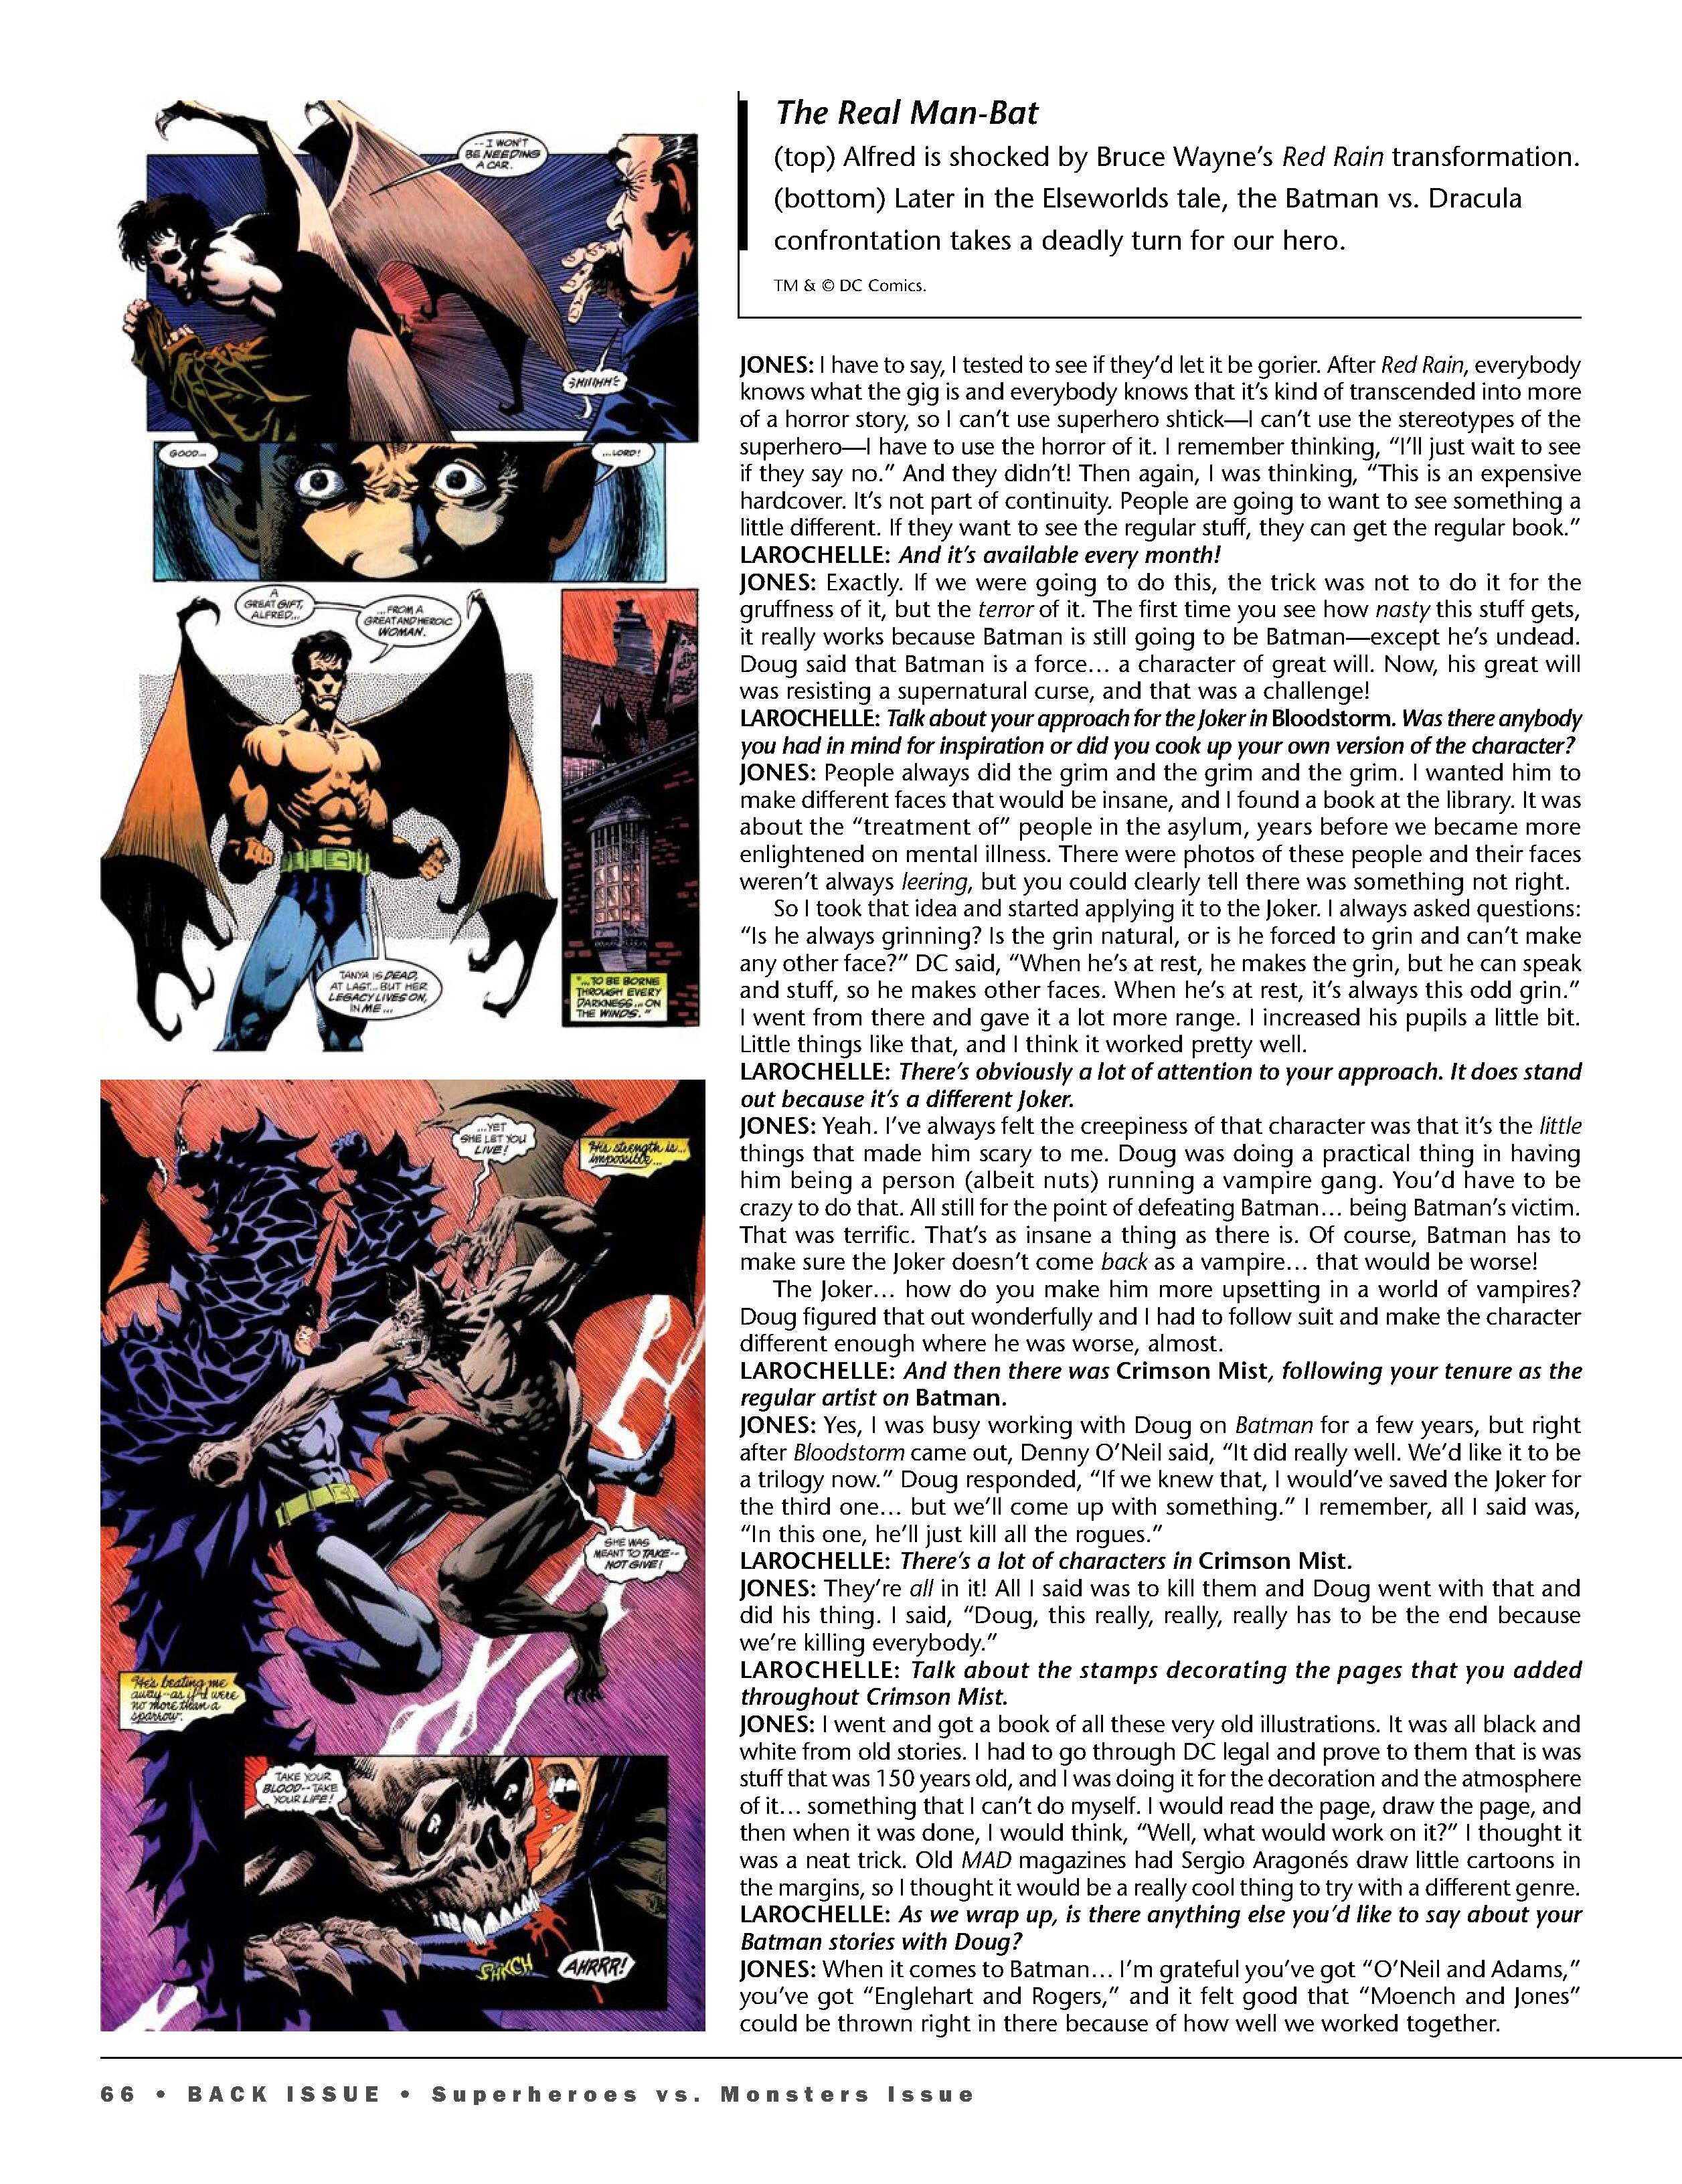 Read online Back Issue comic -  Issue #116 - 68